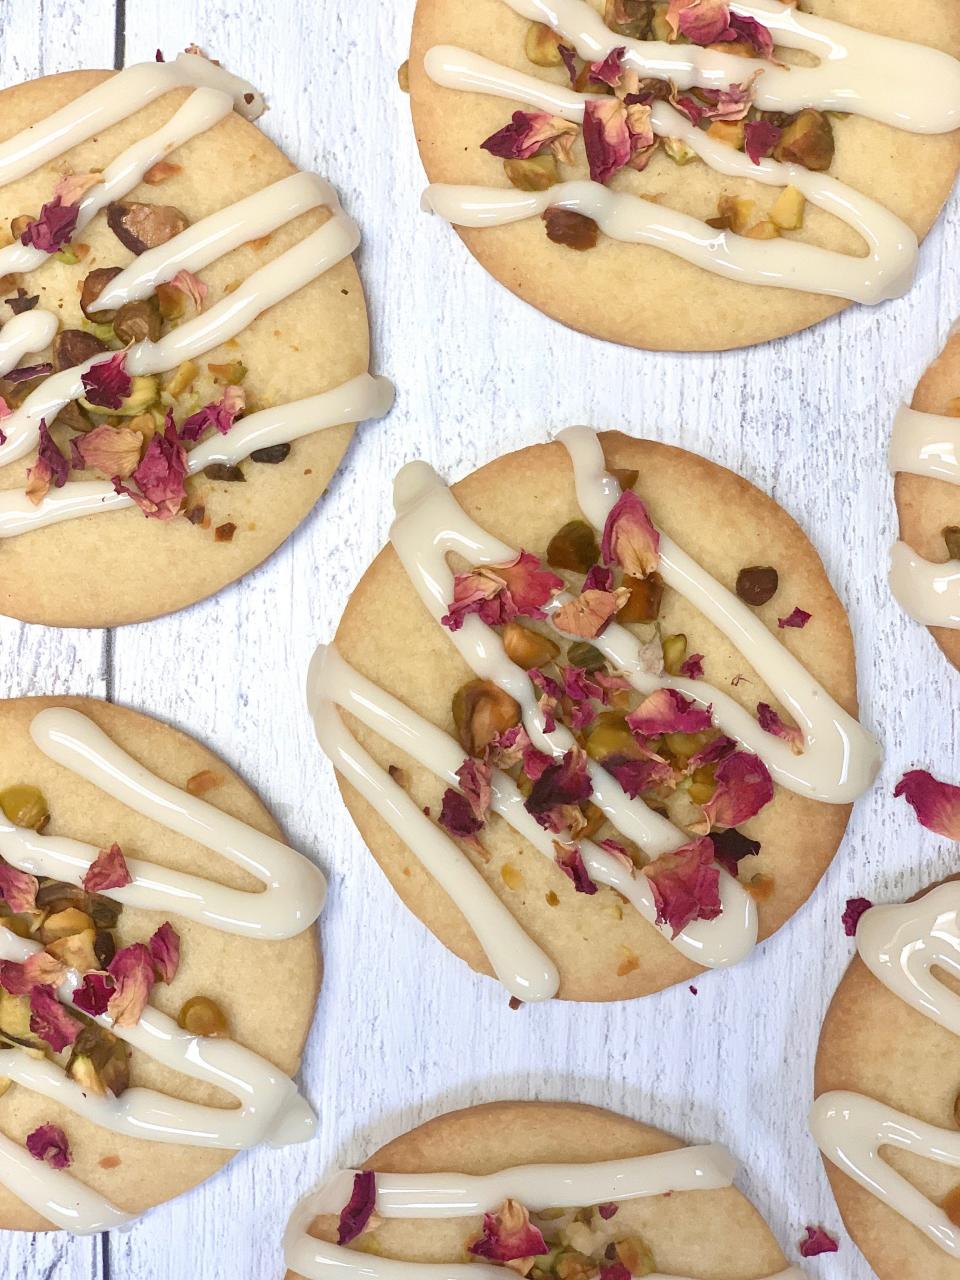 These cookies from Yellow Rose Vegan are garnished with edible flowers and pistachios.